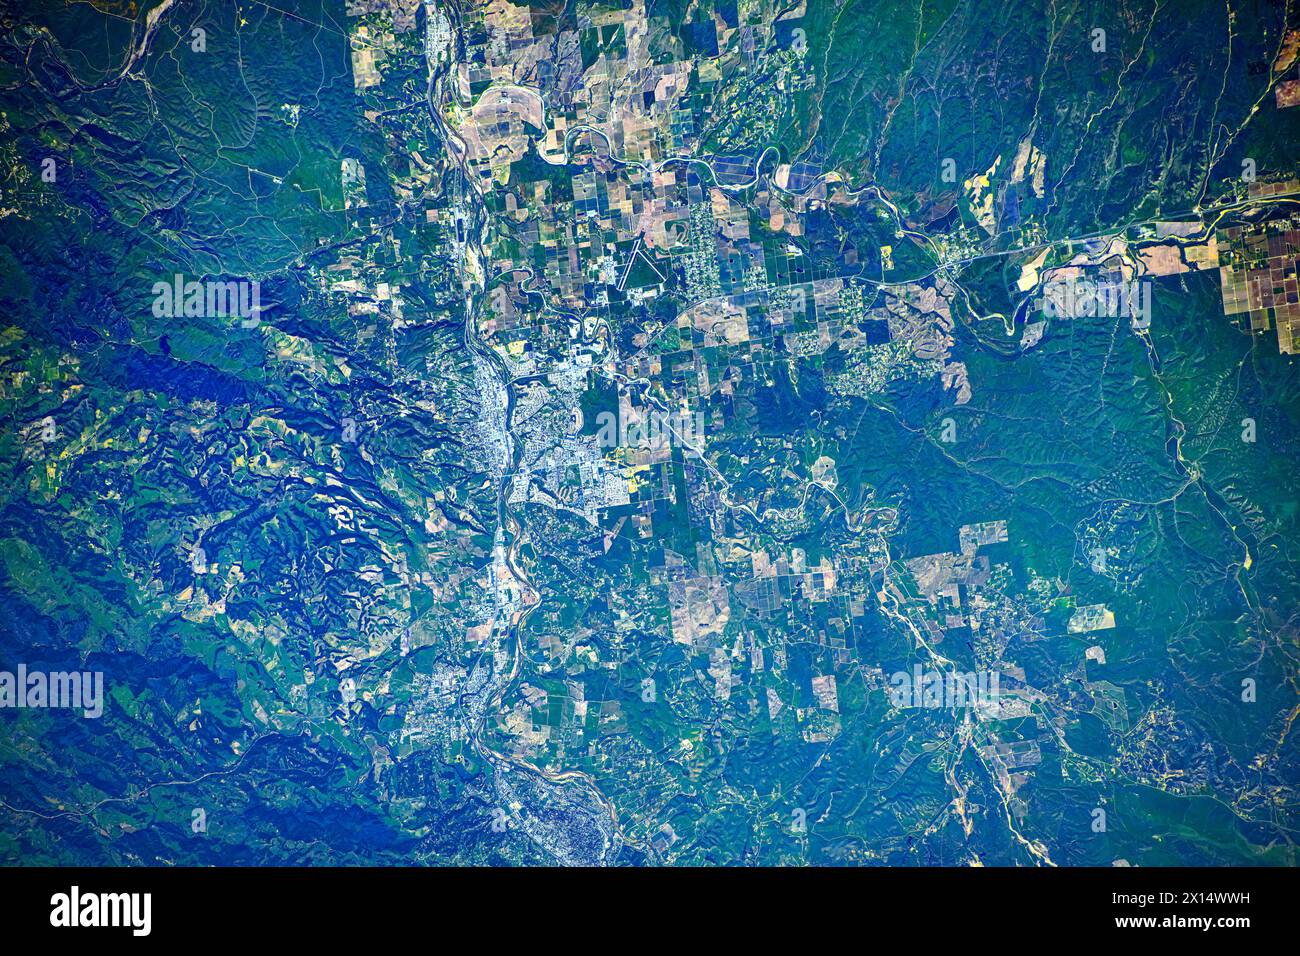 Urban area and land features in California State, USA. Digital enhancement of an image by NASA Stock Photo